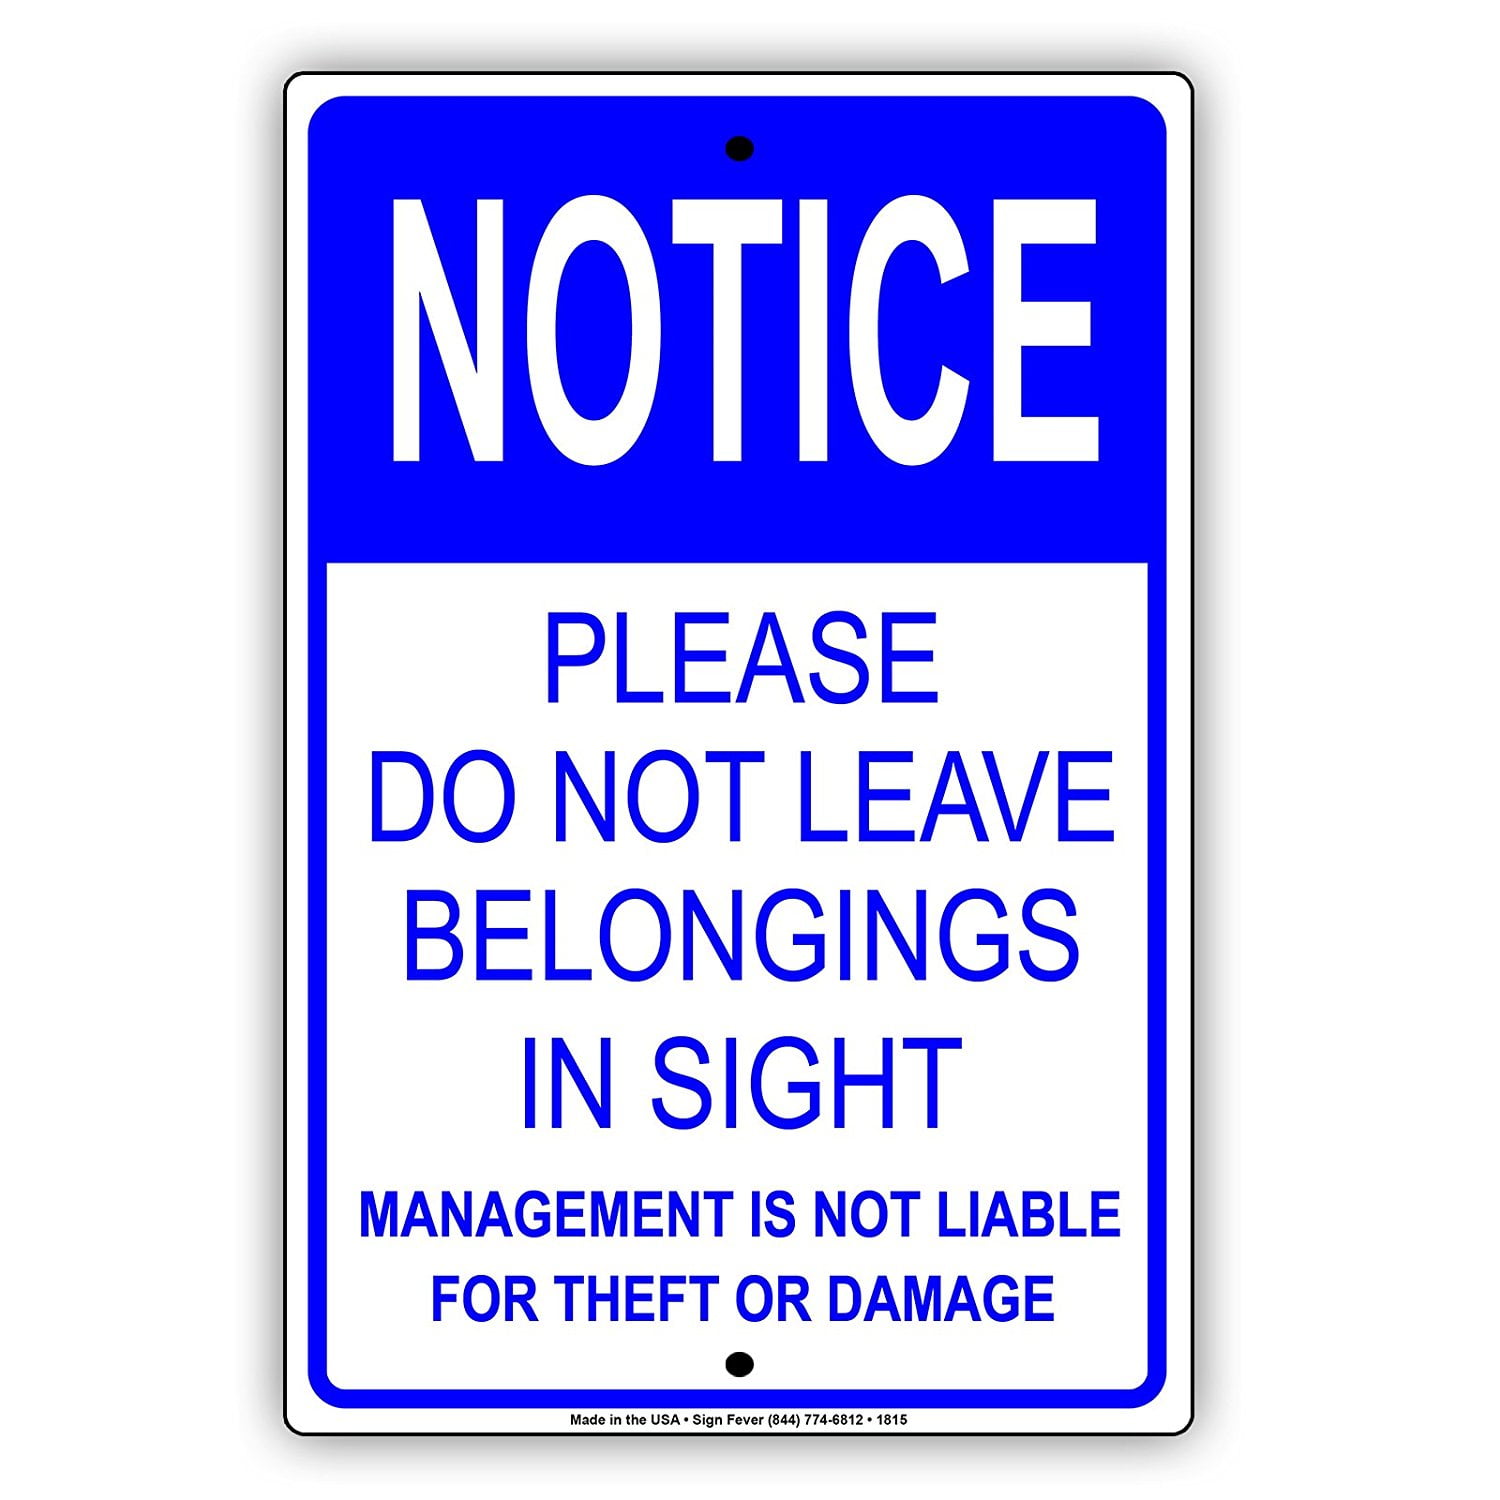 Notice Please Do Not Leave Belongings In Sight Management Not Liable